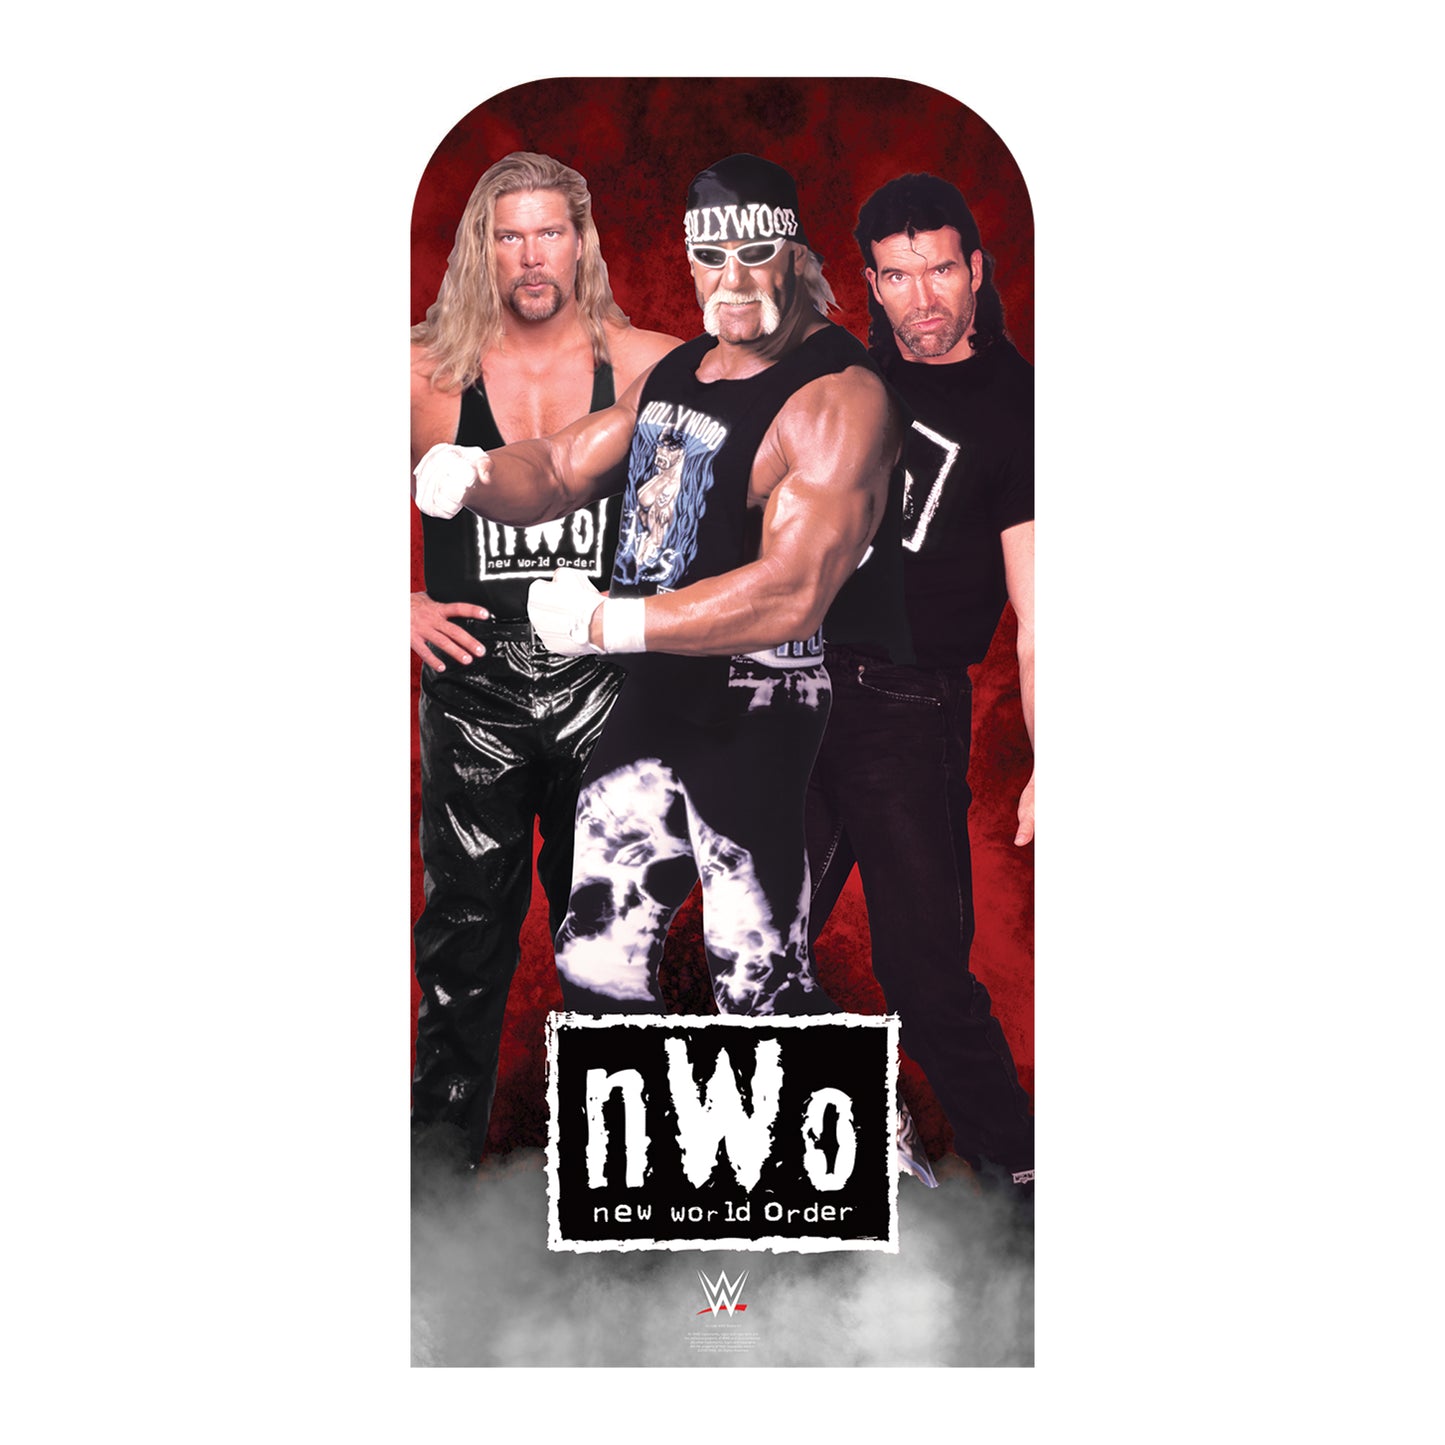 SC4348 NWO WWE Stand In Cardboard Cut Out Height 193cm